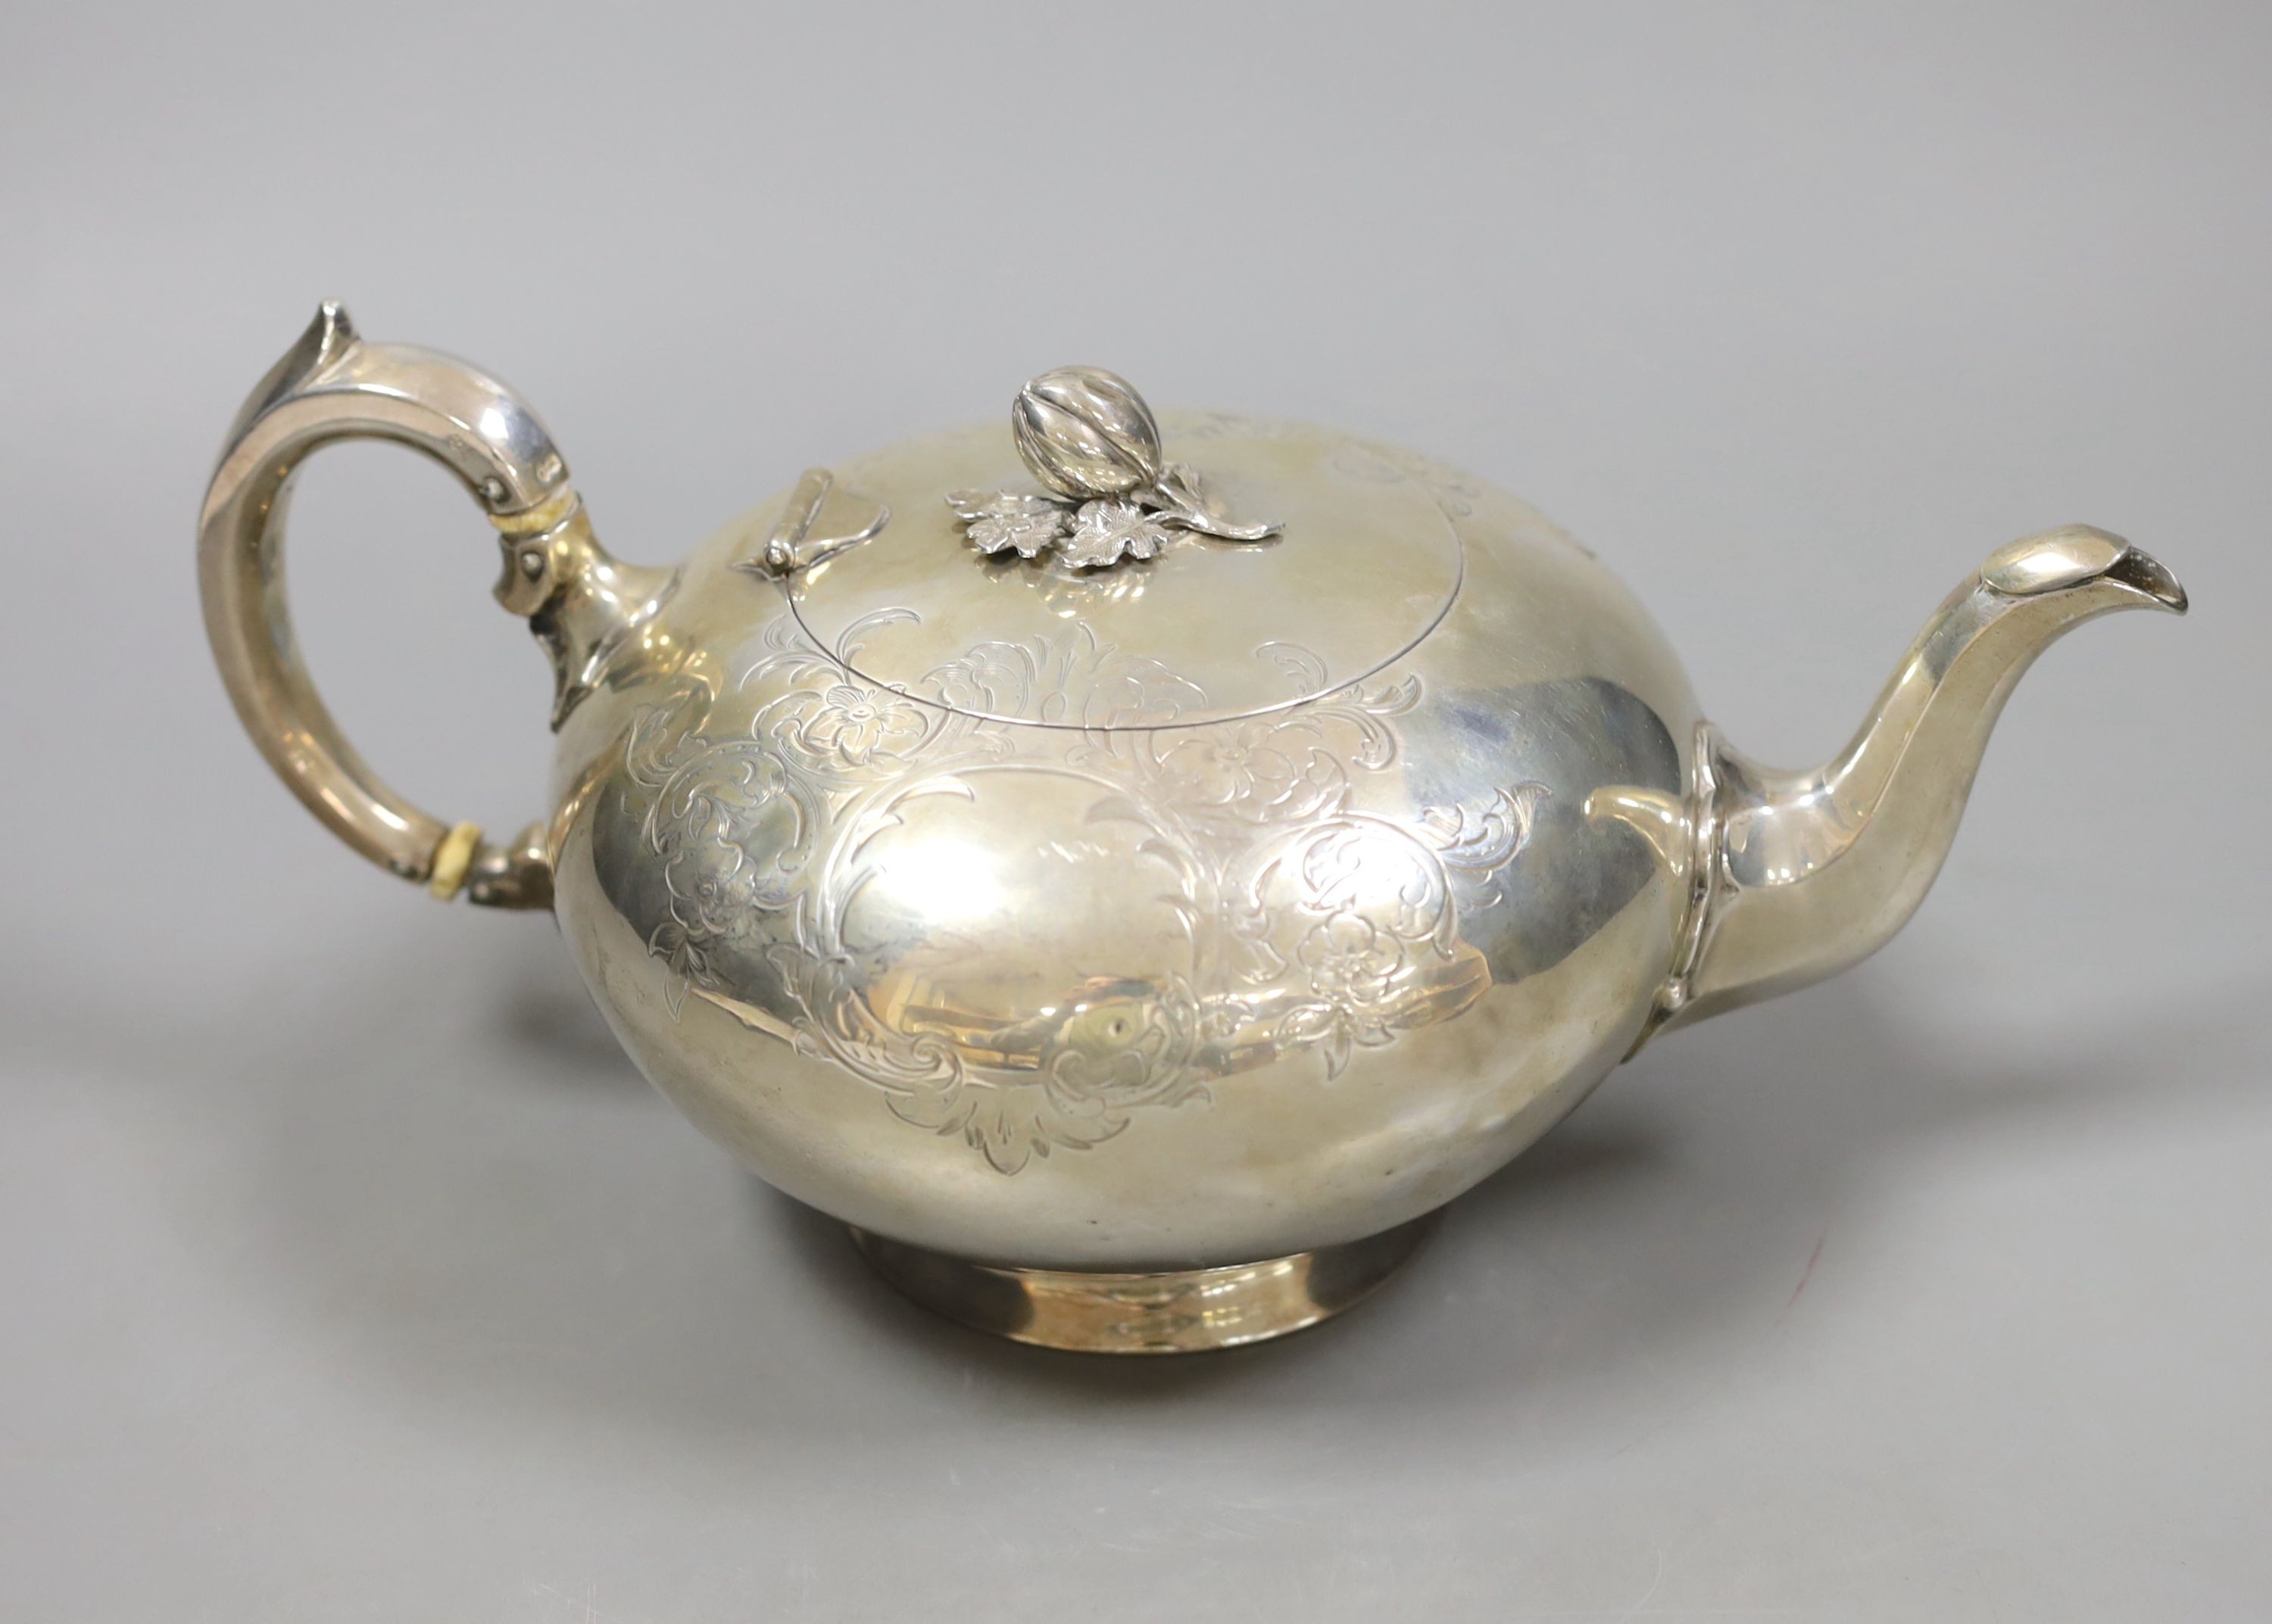 A Victorian engraved silver teapot by William Robert Smily, London, 1952